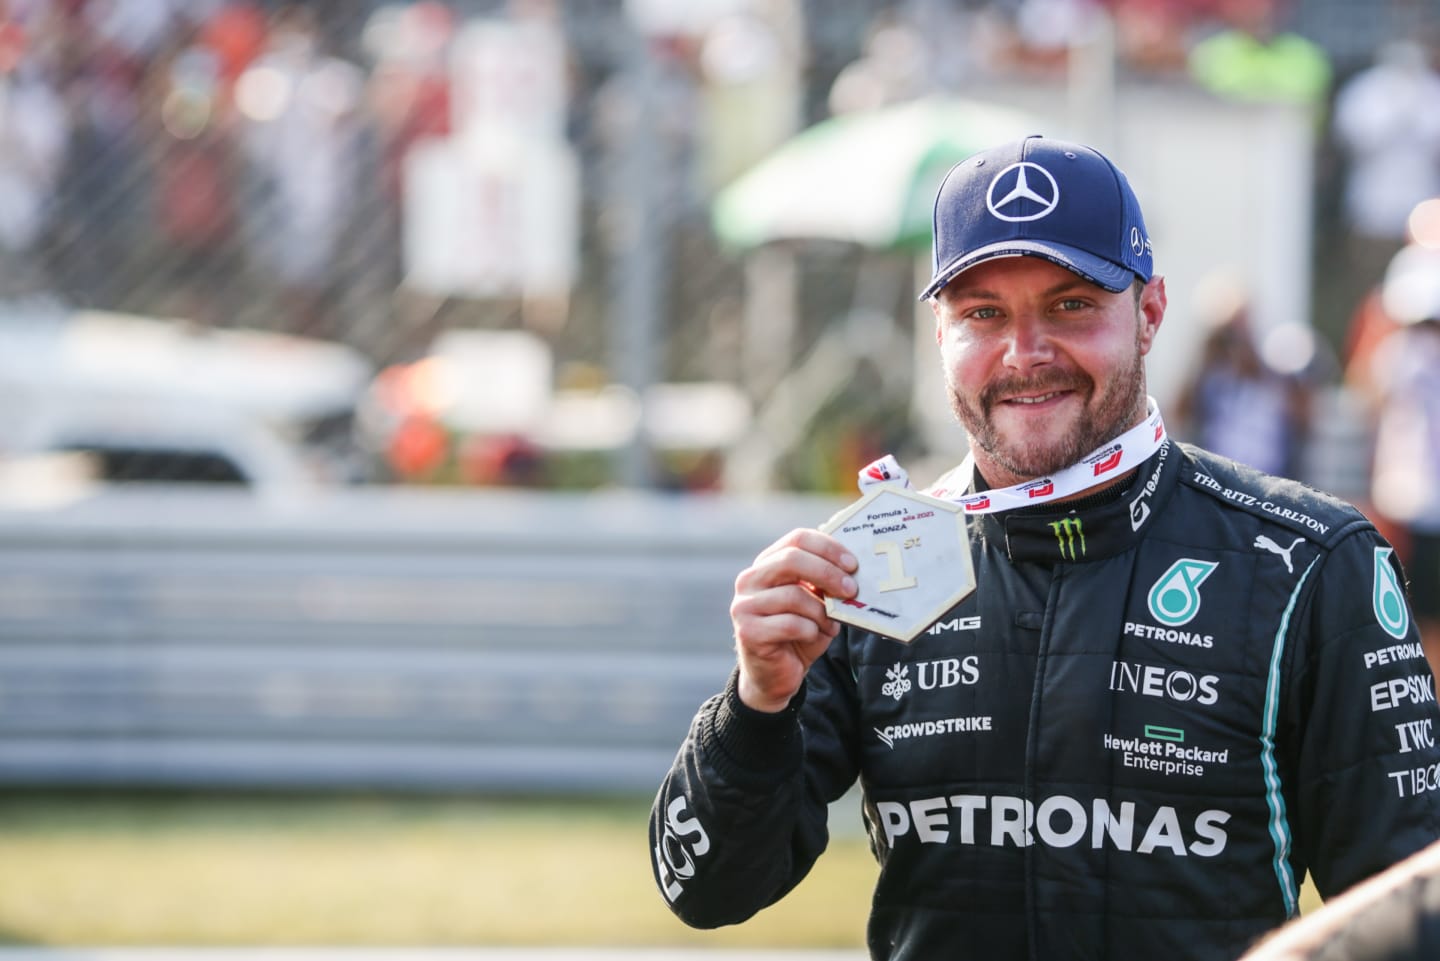 MONZA, ITALY - SEPTEMBER 11: Valterri Bottas of Mercedes and Finland wins the Sprint race ahead of